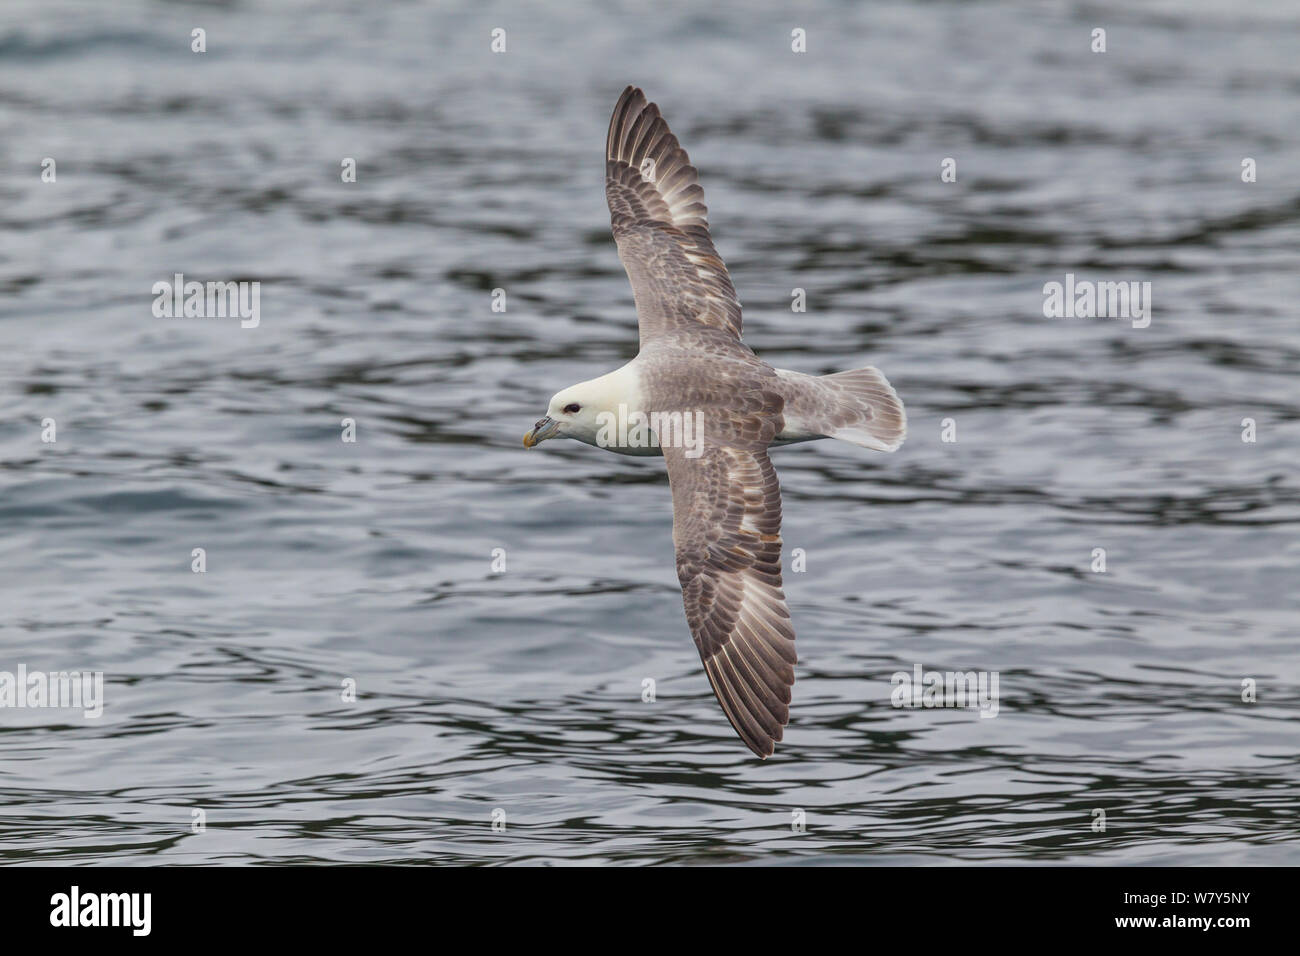 Northern fulmar (Fulmarus glacialis) flying at sea, low over the water showing the upperwing. Foula, Shetland islands, United Kingdom. June. Stock Photo